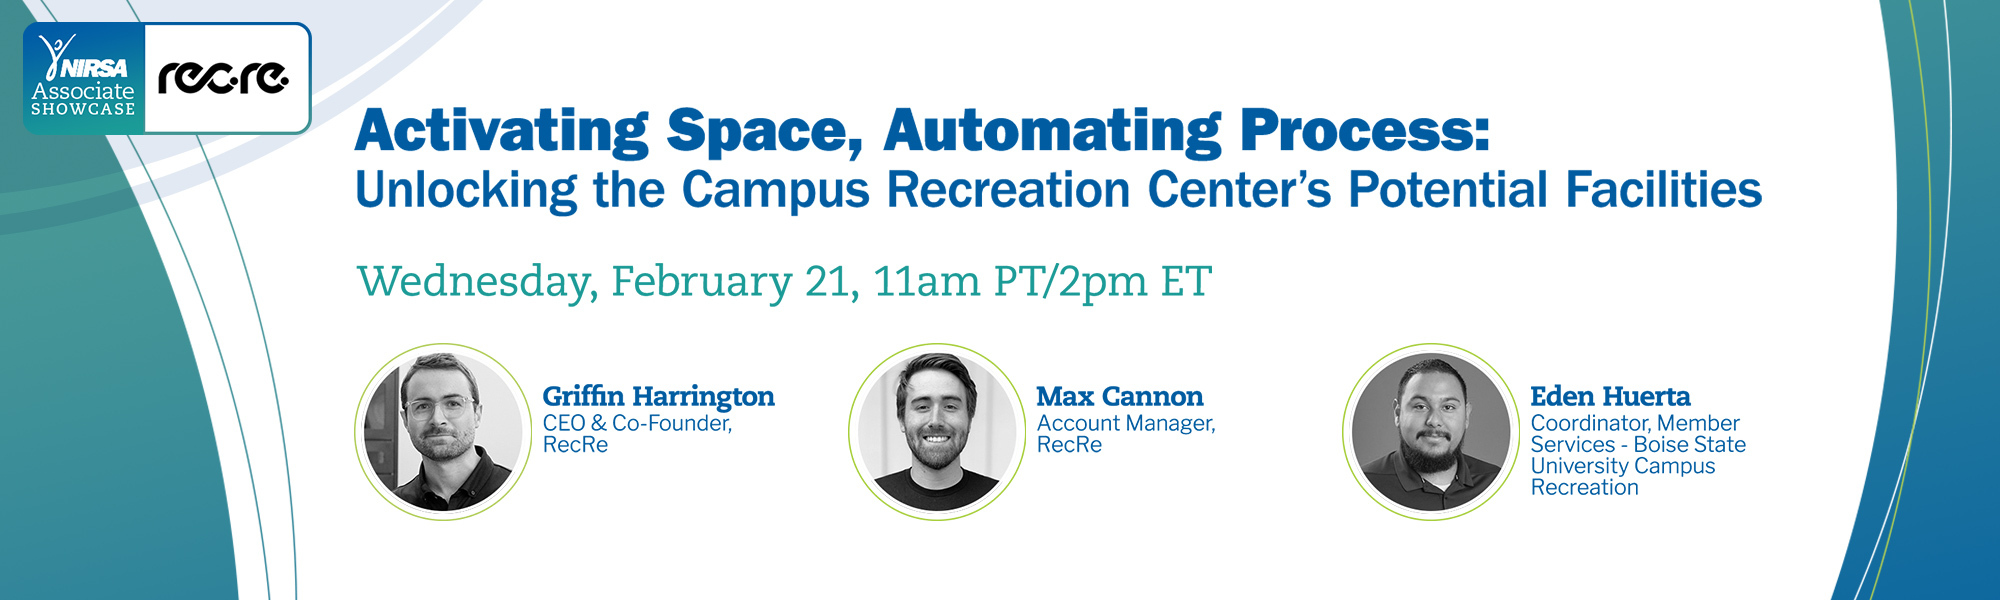 Activating Space, Automating Process: Unlocking the Campus Recreation Center’s Potential